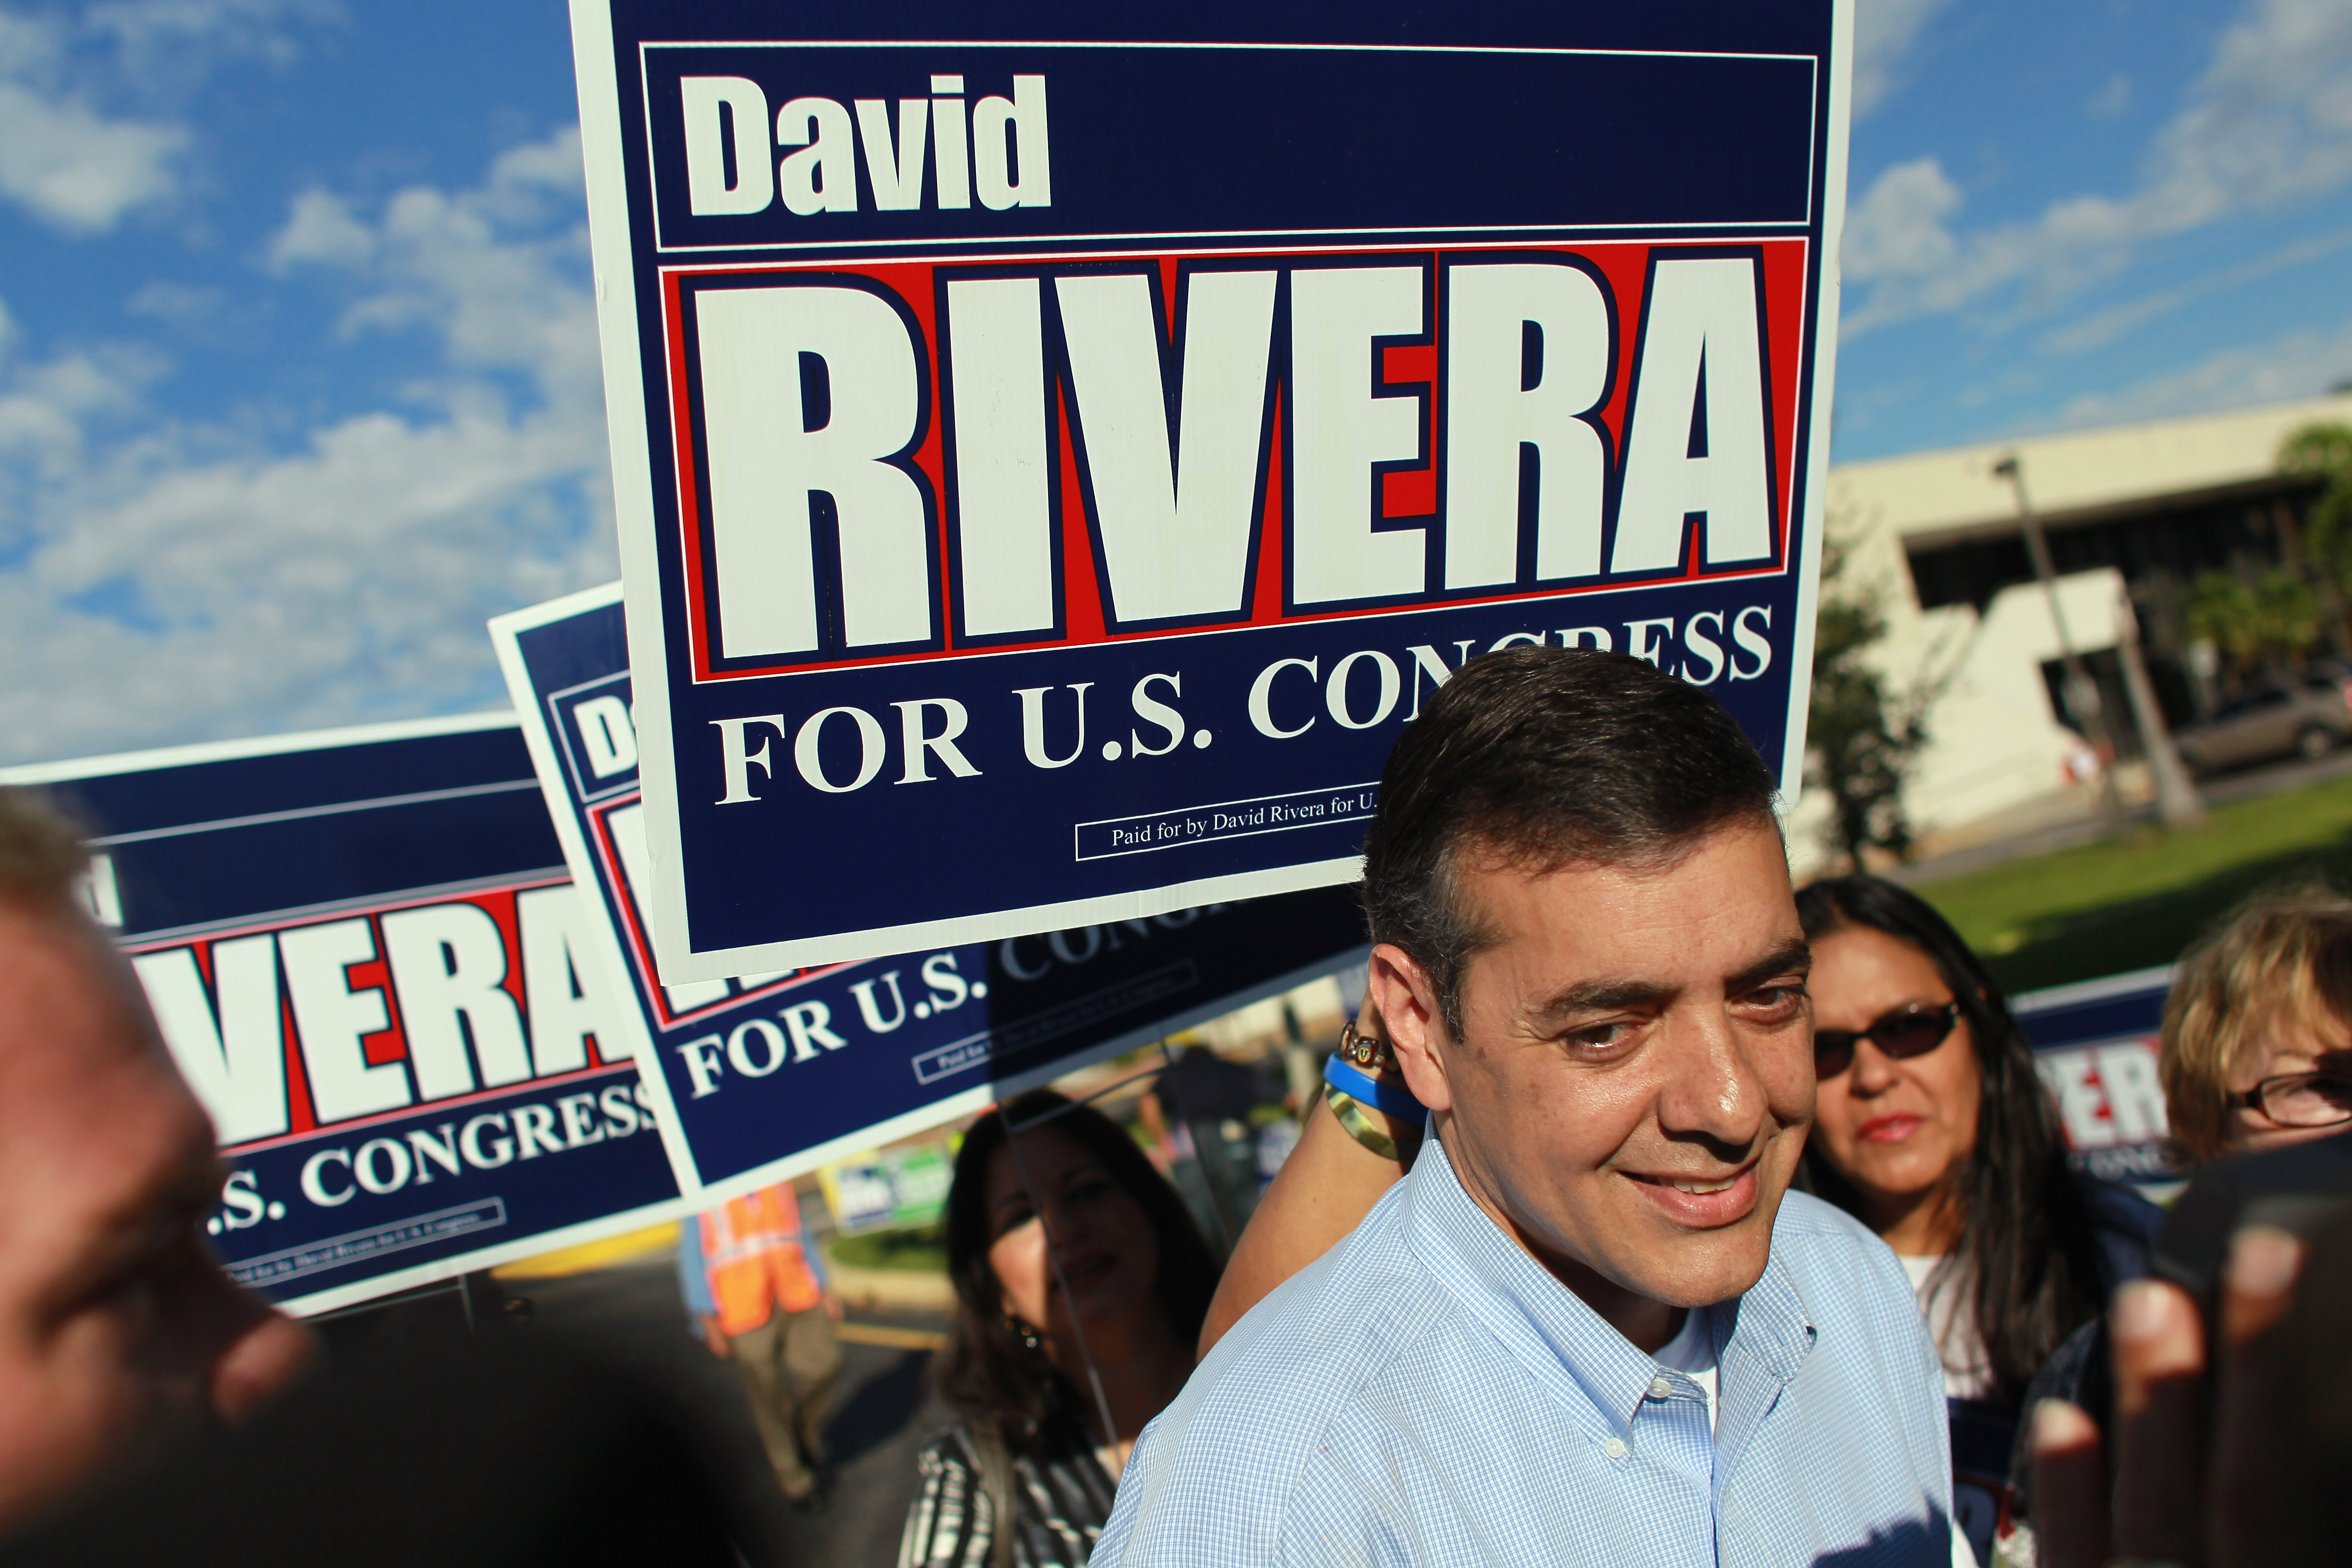 Republican Congressional candidate David Rivera is greeted by supporters as he campaigns at an early voting site on October 20, 2010 in Miami, Florida. Rivera is running against Democrat Joe Garcia for the 25th congressional district. (Photo by Joe Raedle/Getty Images)